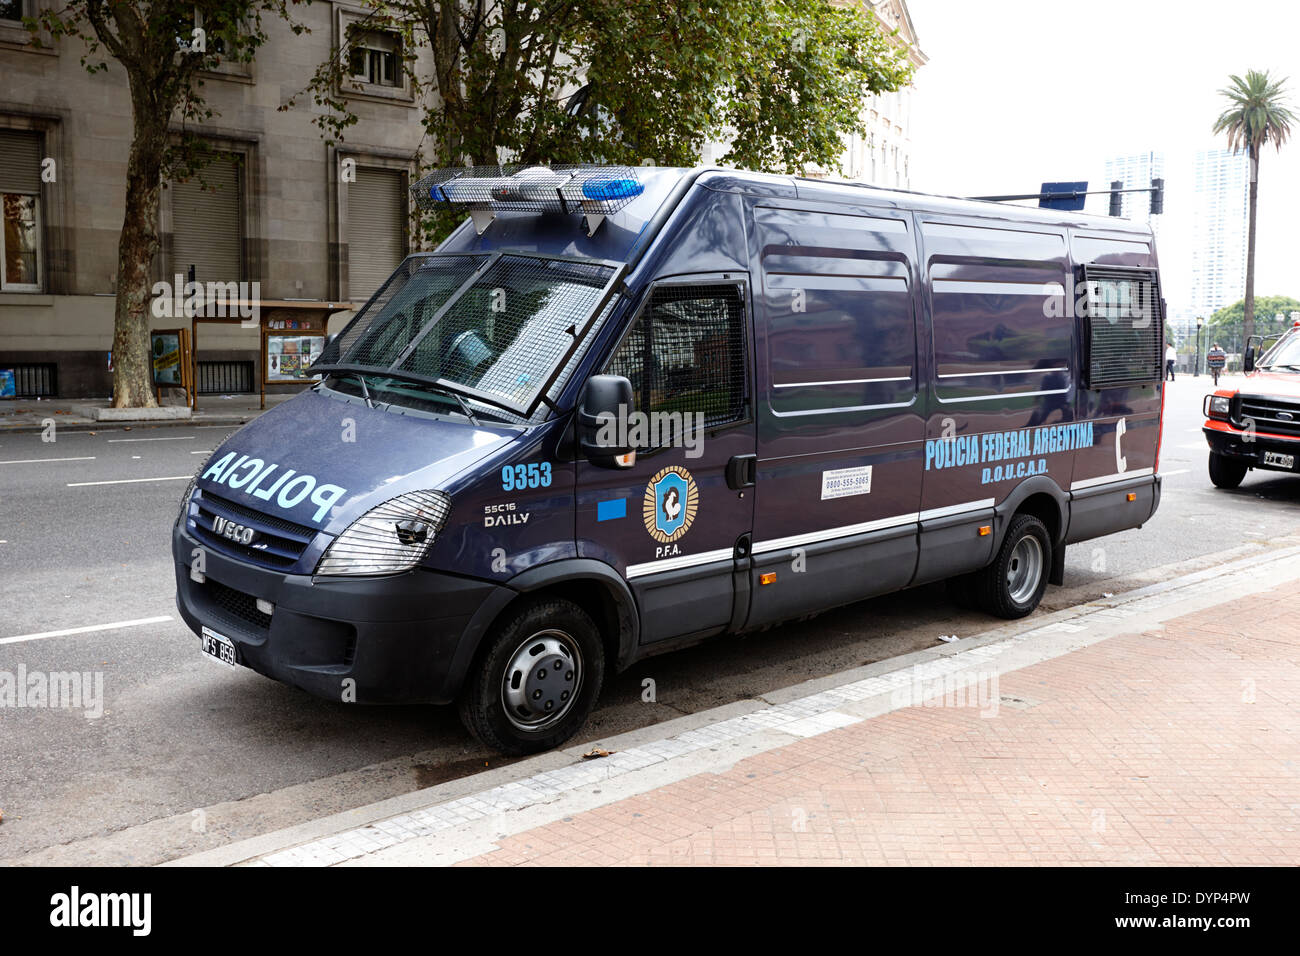 policia federal argentina federal police riot control doucad vehicle Buenos Aires Argentina Stock Photo